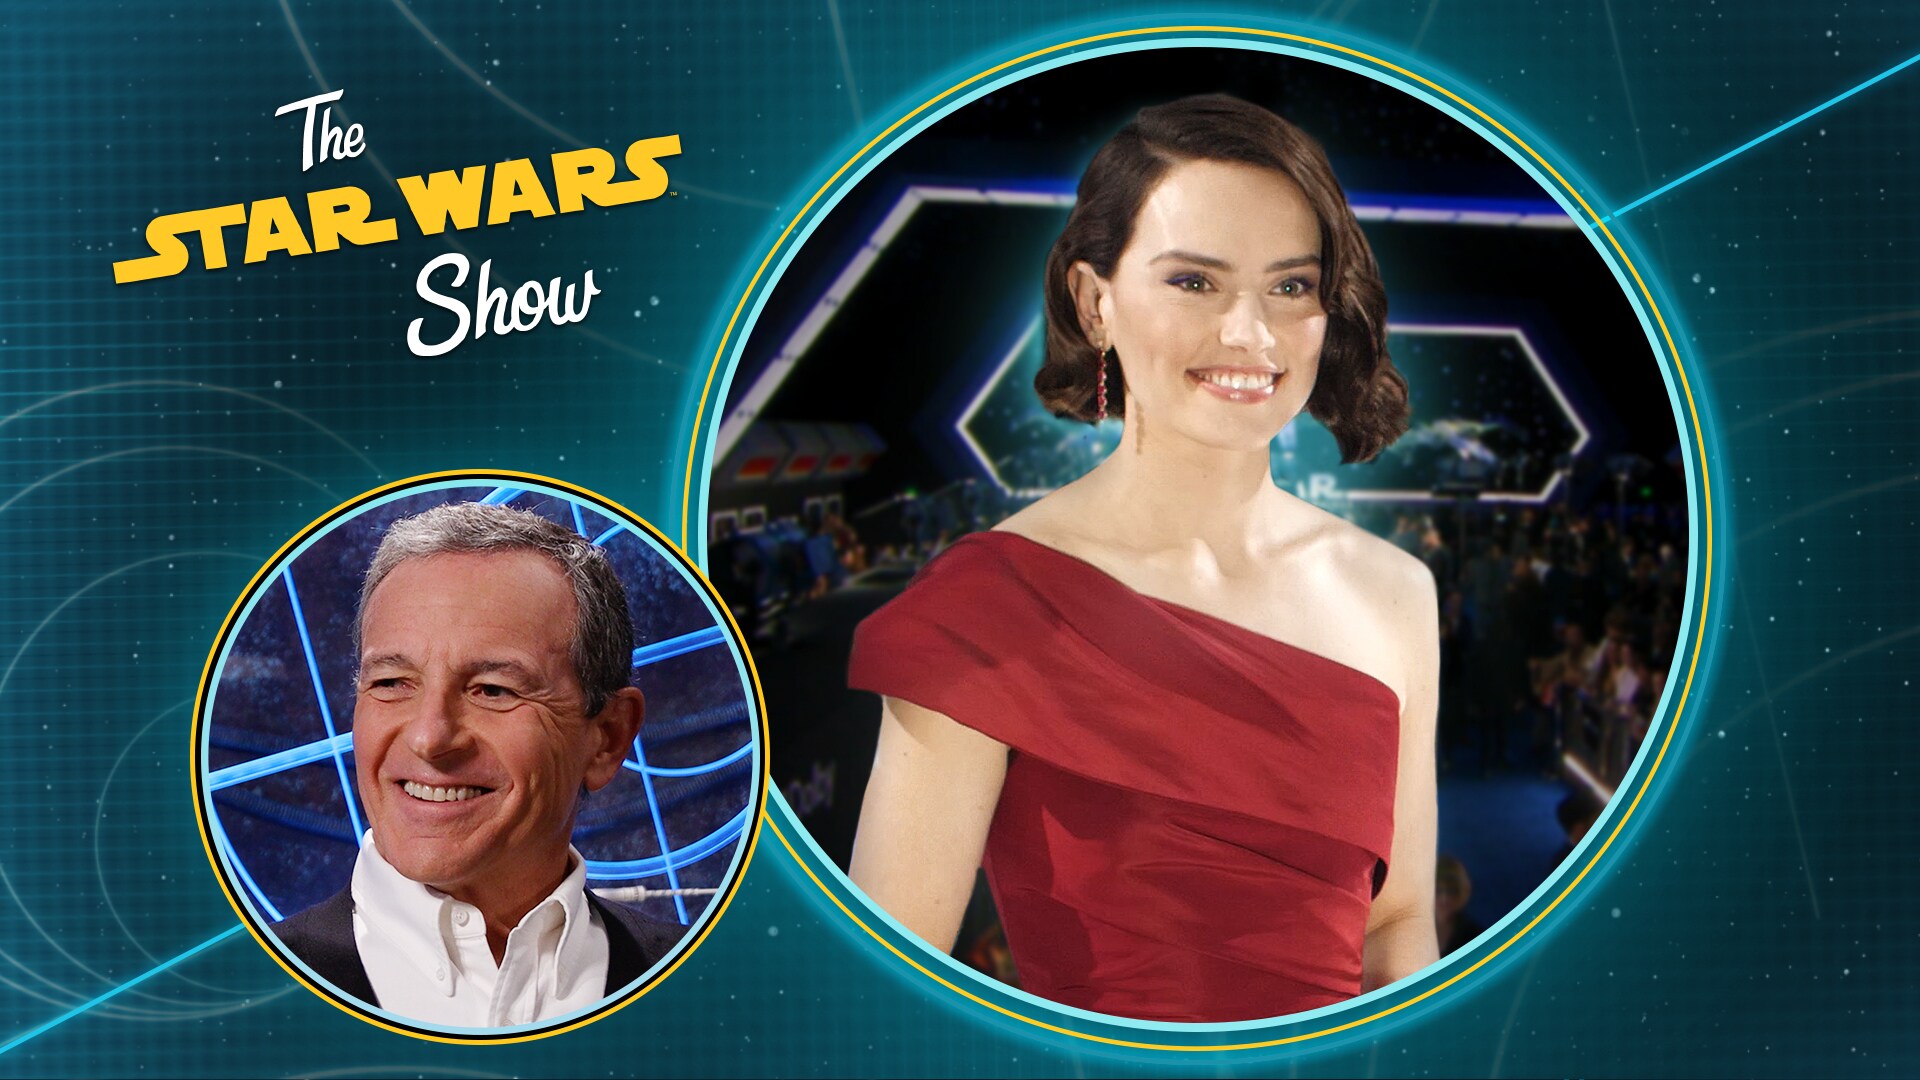 The Rise of Skywalker World Premiere, Bob Iger, and Much More!